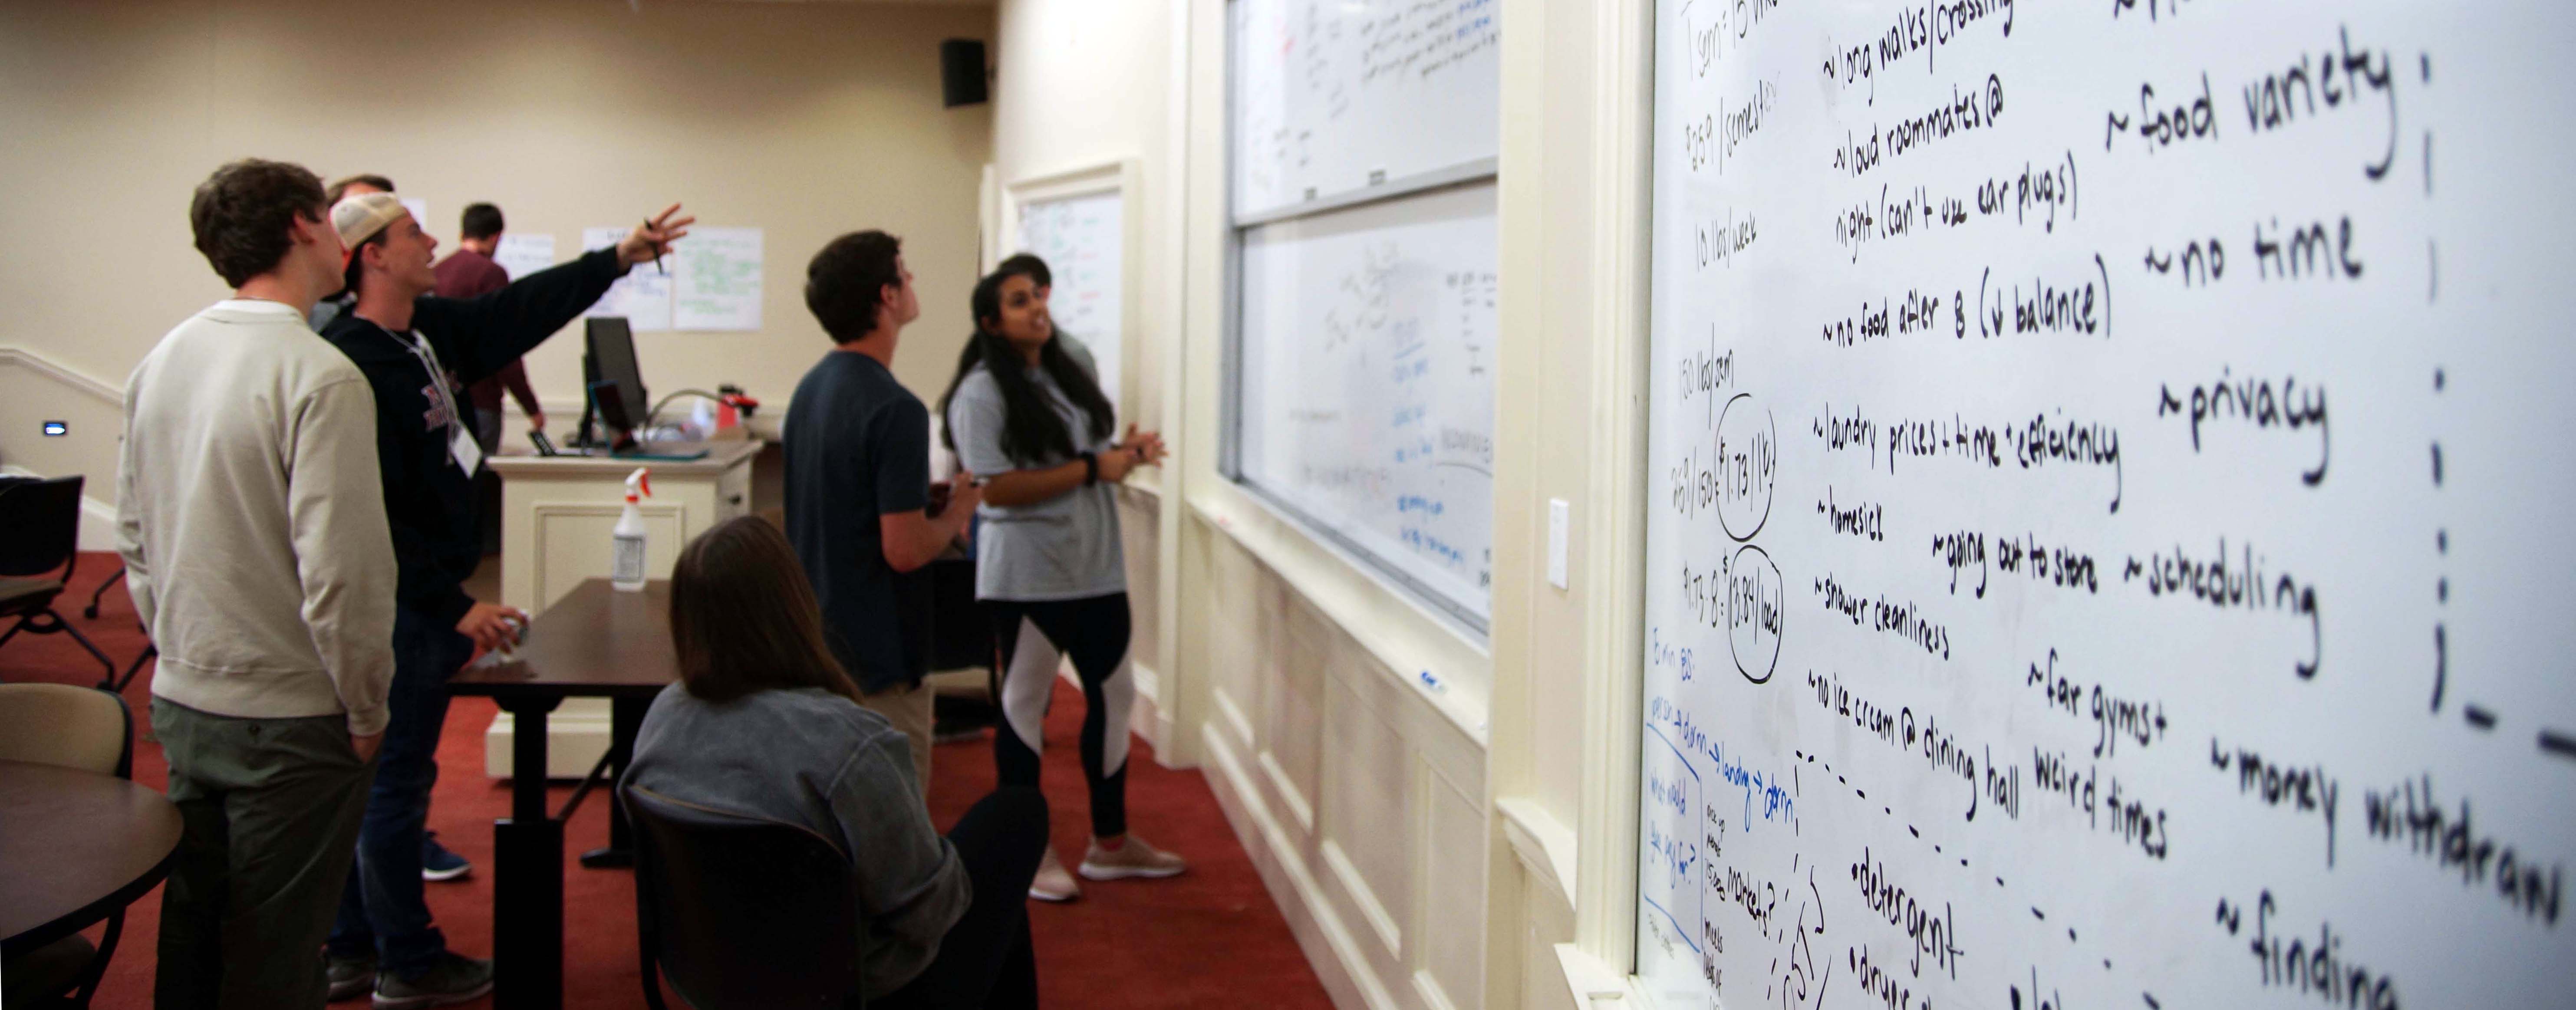 A team works on their idea at a whiteboard in a classroom